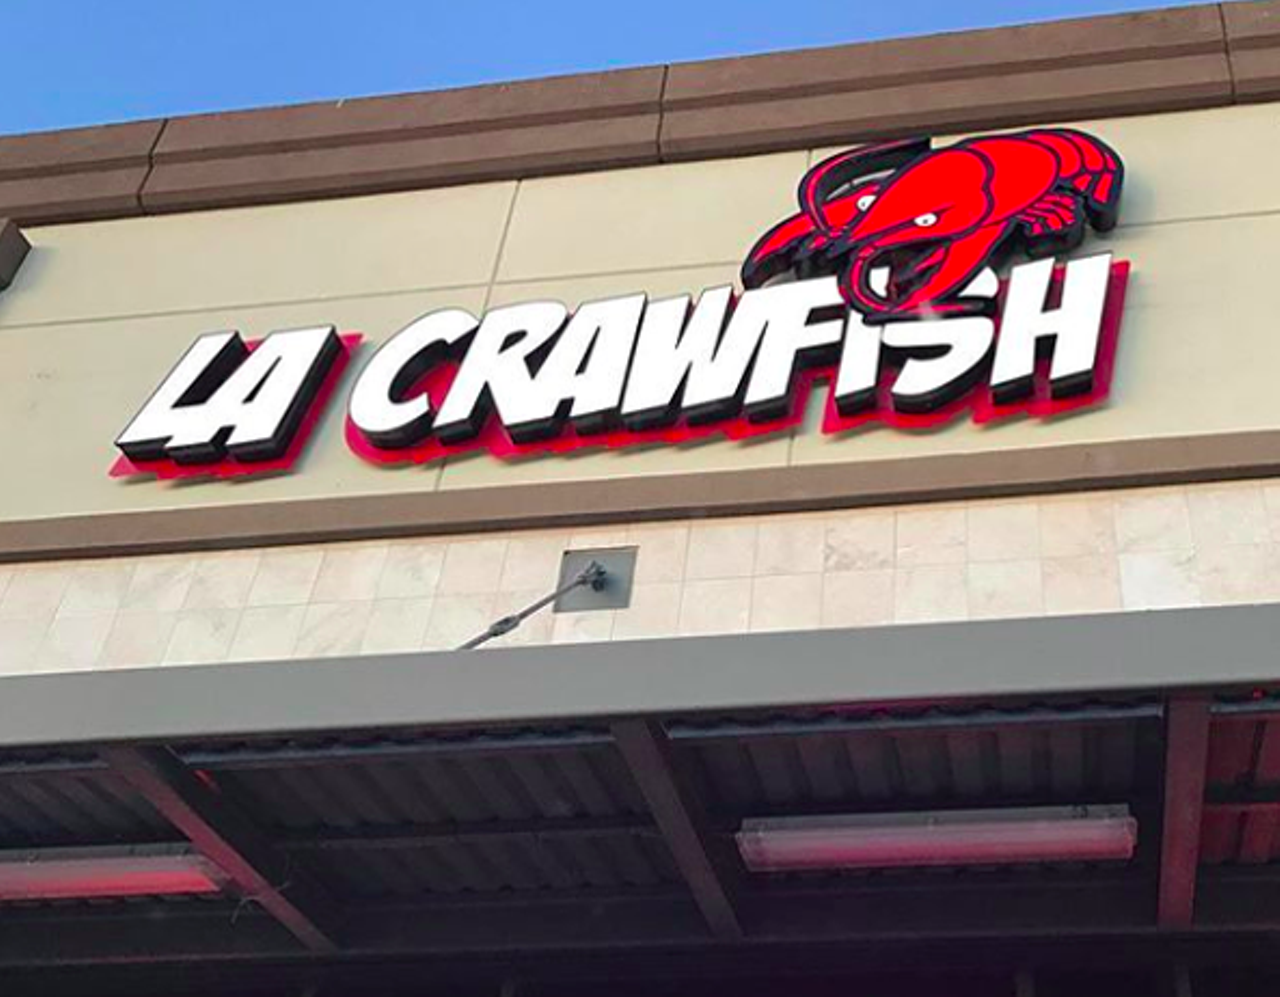 LA Crawfish
22502 US 281 N. Suite 110
According to T. Pham, regional operator for SA market, the store will likely open by the end of the year. Though cozier than the first location in San Antonio off of Culebra Road, the new location will feature the same menu the brand is known for on a smaller scale. Pham, who helped open the first store in Houston in 2011, says LA Crawfish will be expanding aggressively across the San Antonio market.